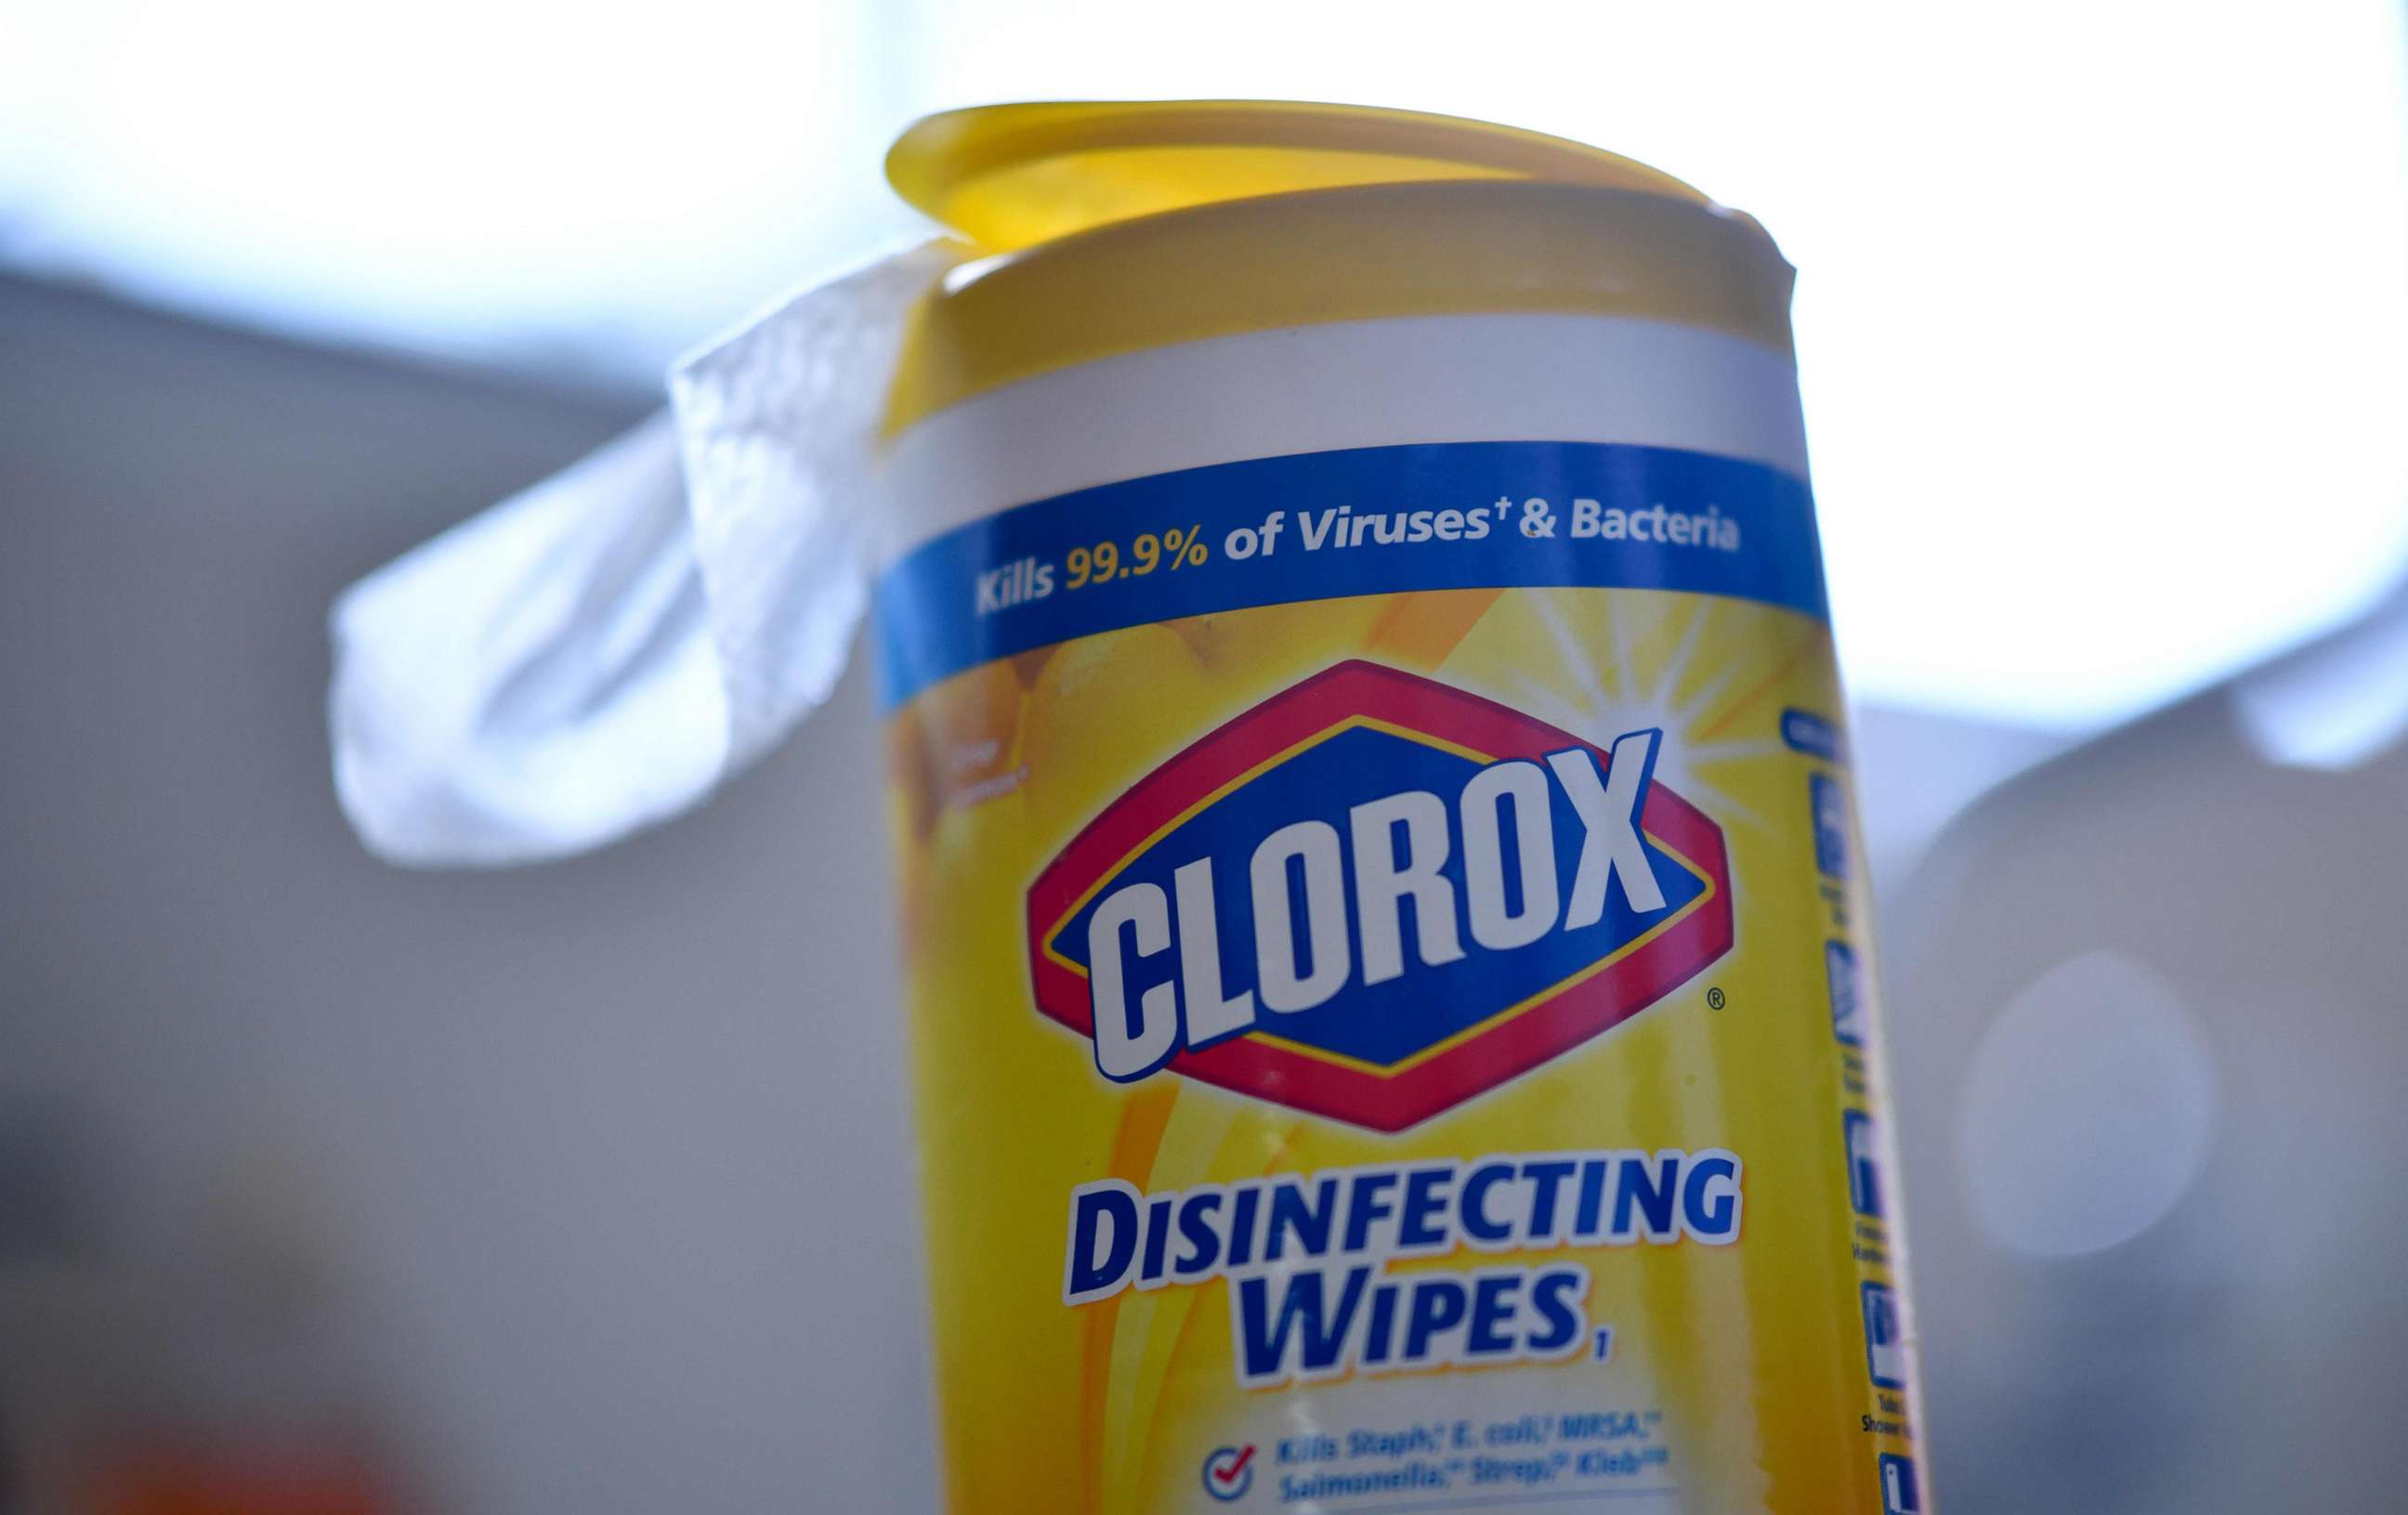 PHOTO: This April 24, 2020, file photo shows a container of Clorox disinfecting wipes in a kitchen in Culver City, Calif., amid the COVID-19 pandemic.